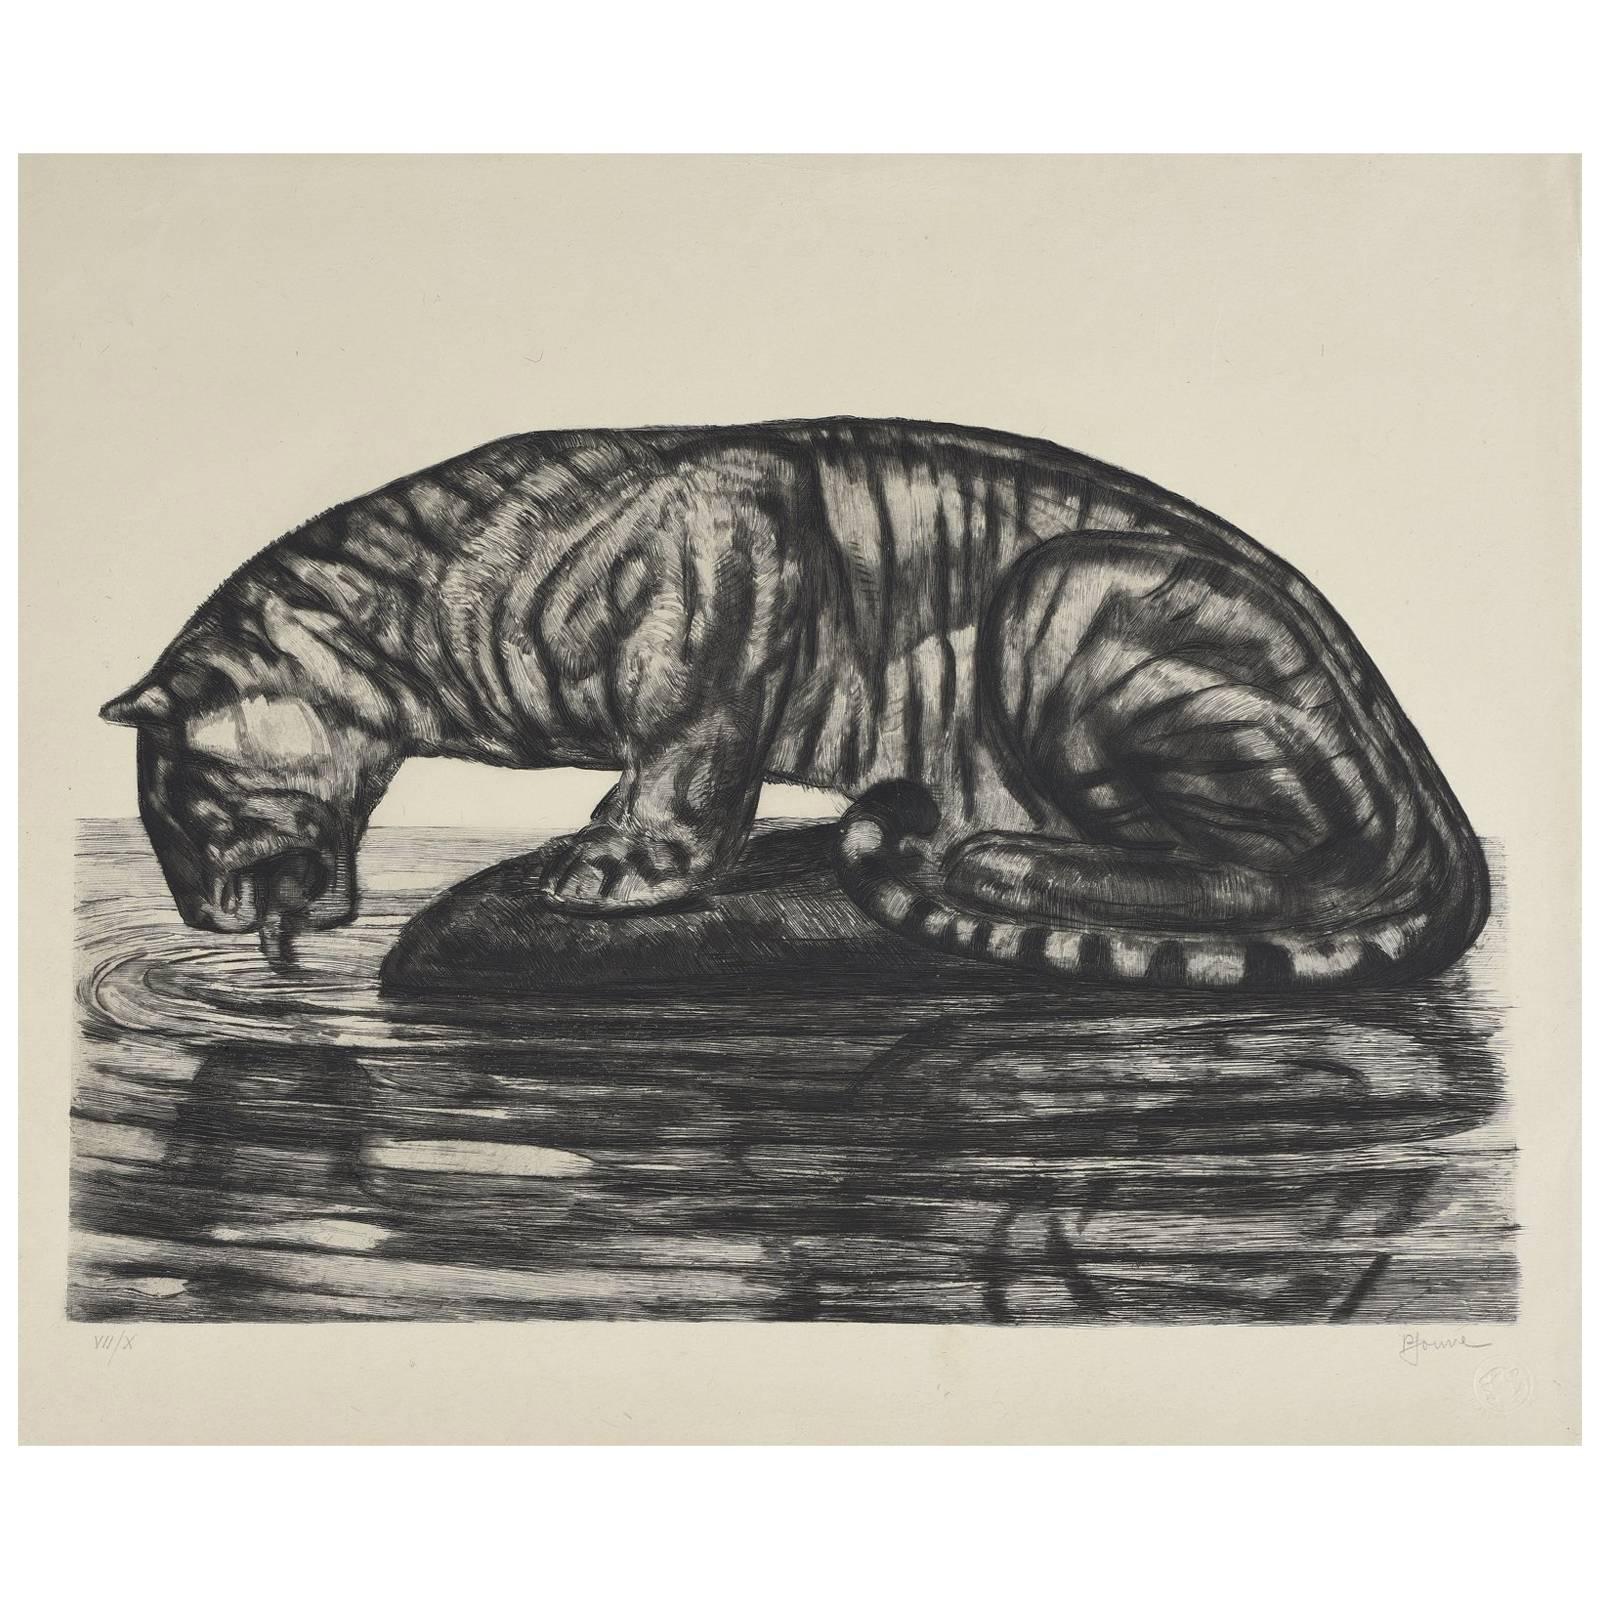 Drinking Tiger, Original Etching by Paul Jouve, circa 1930